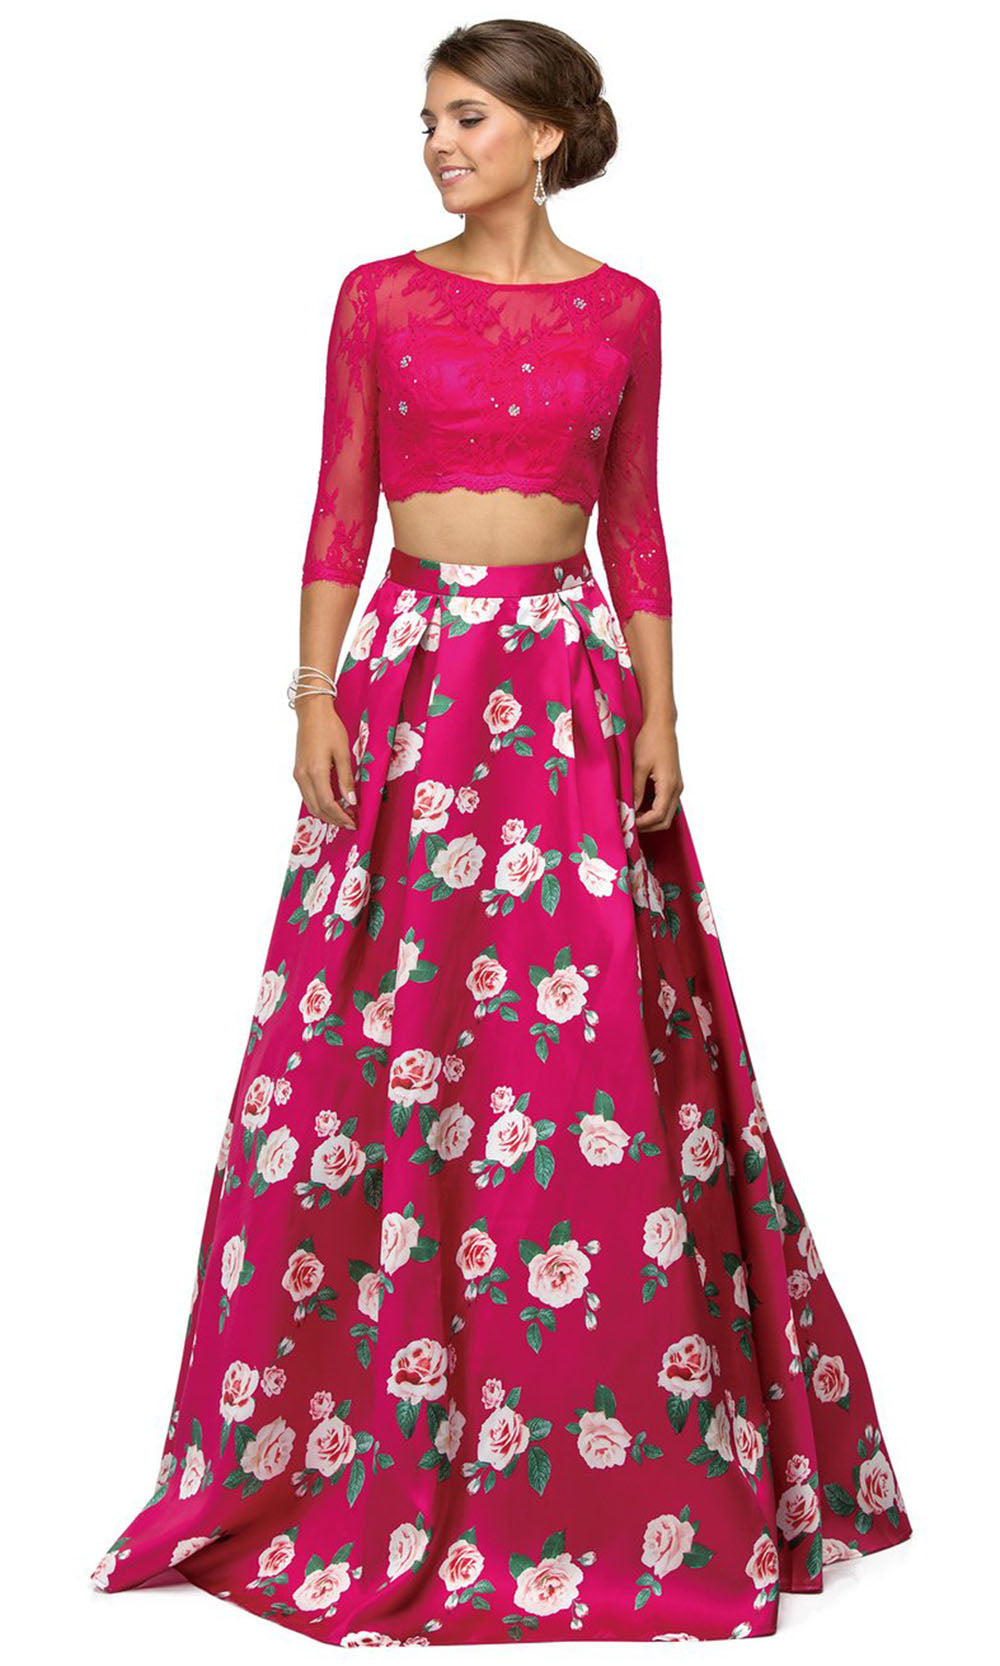 Dancing Queen - 9452 Quarter Sleeve Floral Two Piece Ballgown In Pink